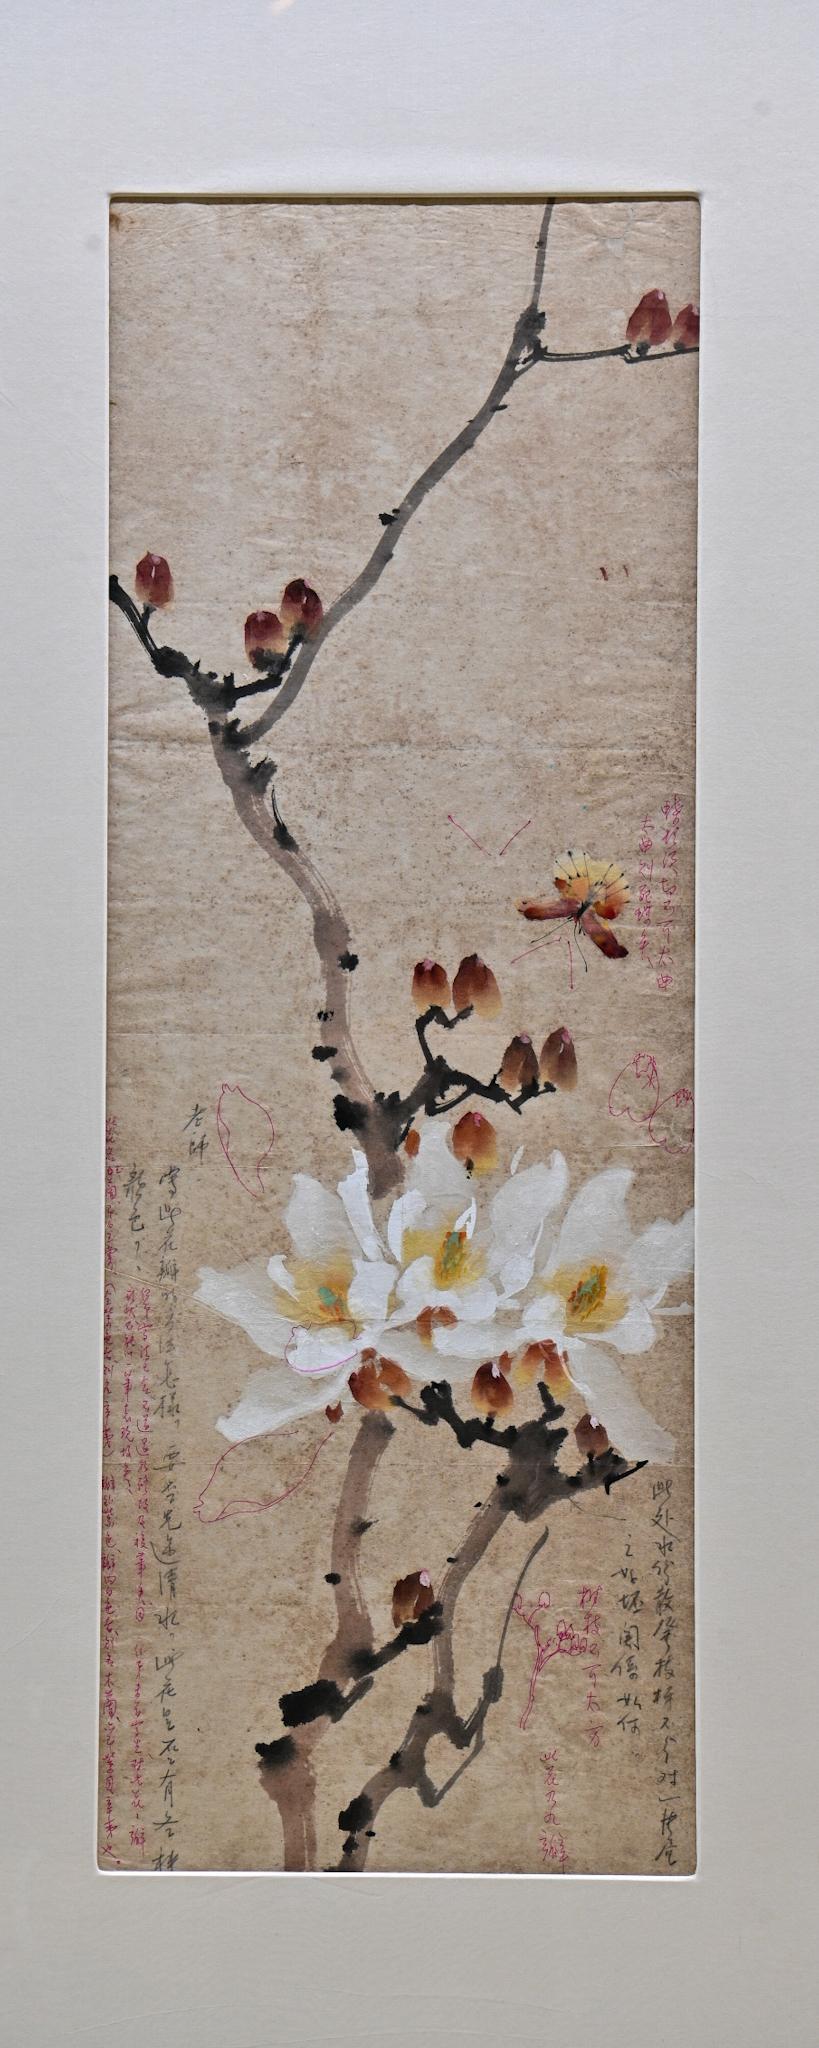 The exhibition "From a Distance: Art Dialogues between Chao Shao-an and Chin Kee" will be open to the public from tomorrow (September 21) at the Hong Kong Heritage Museum. Picture shows Chin Kee's painting assignment "Magnolia and butterfly", with questions and answers between Chao Shao-an and Chin and demonstration drafts. 